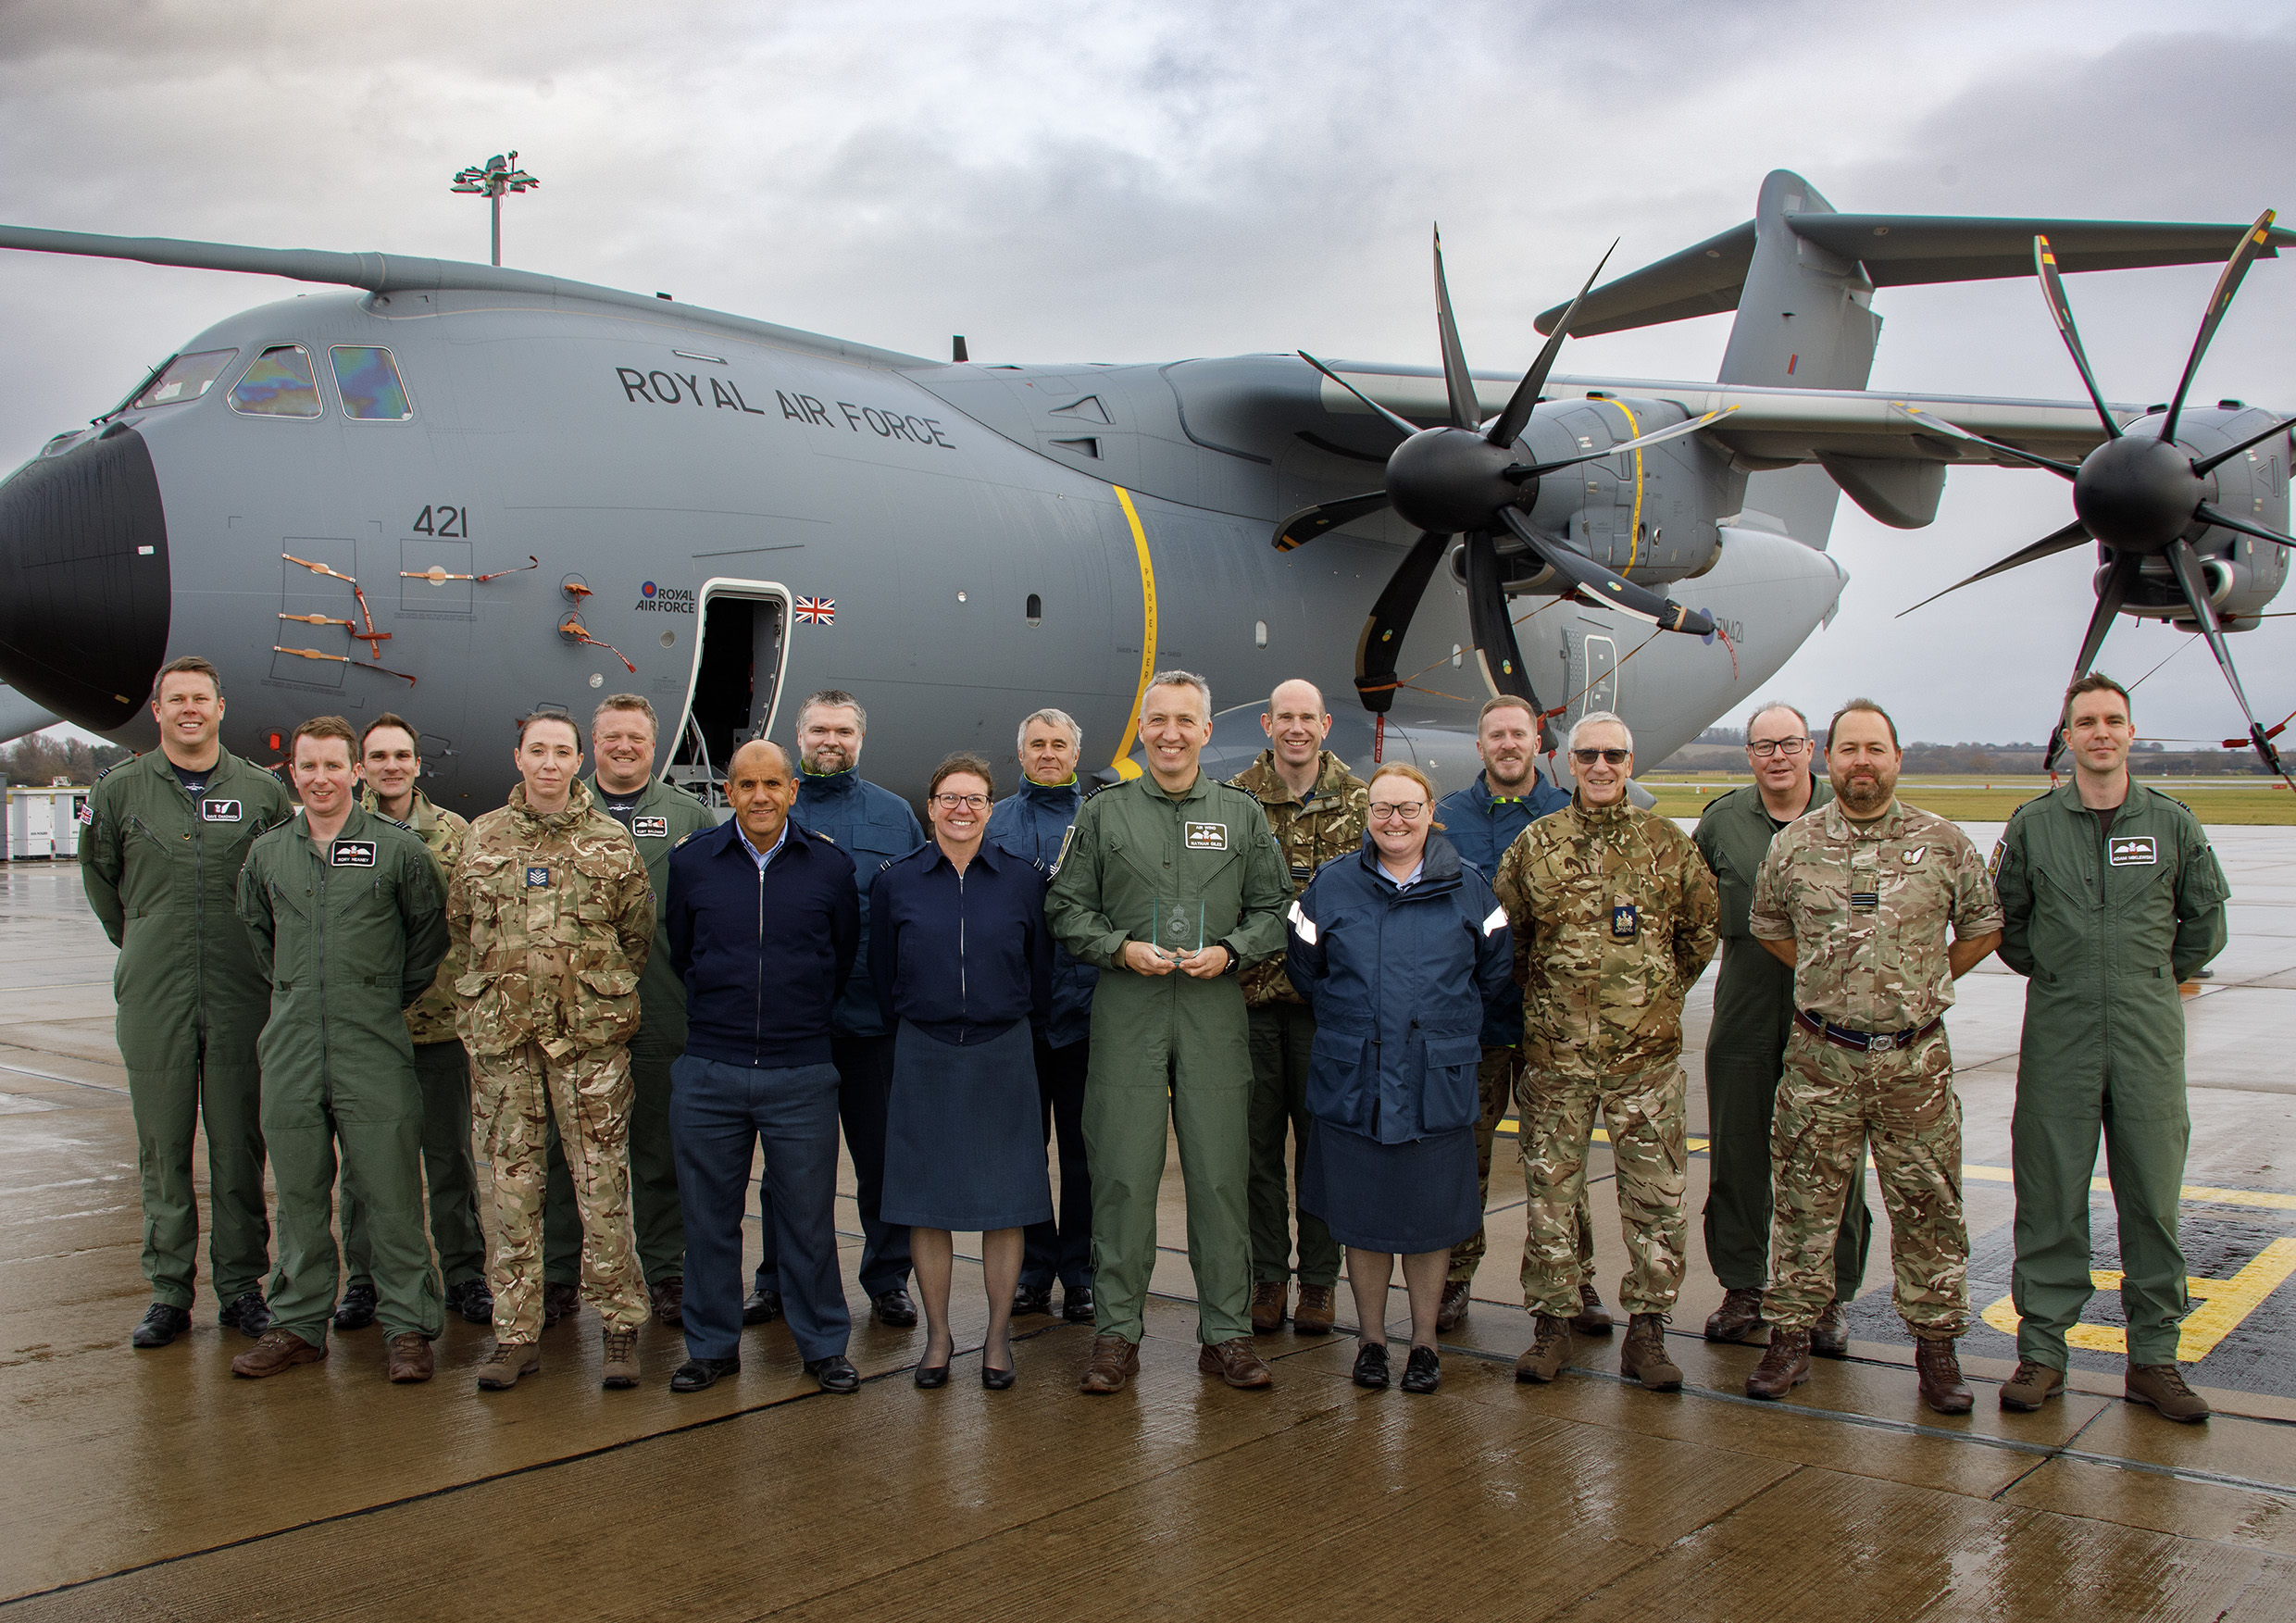 The Air Mobility Force Air Safety Team